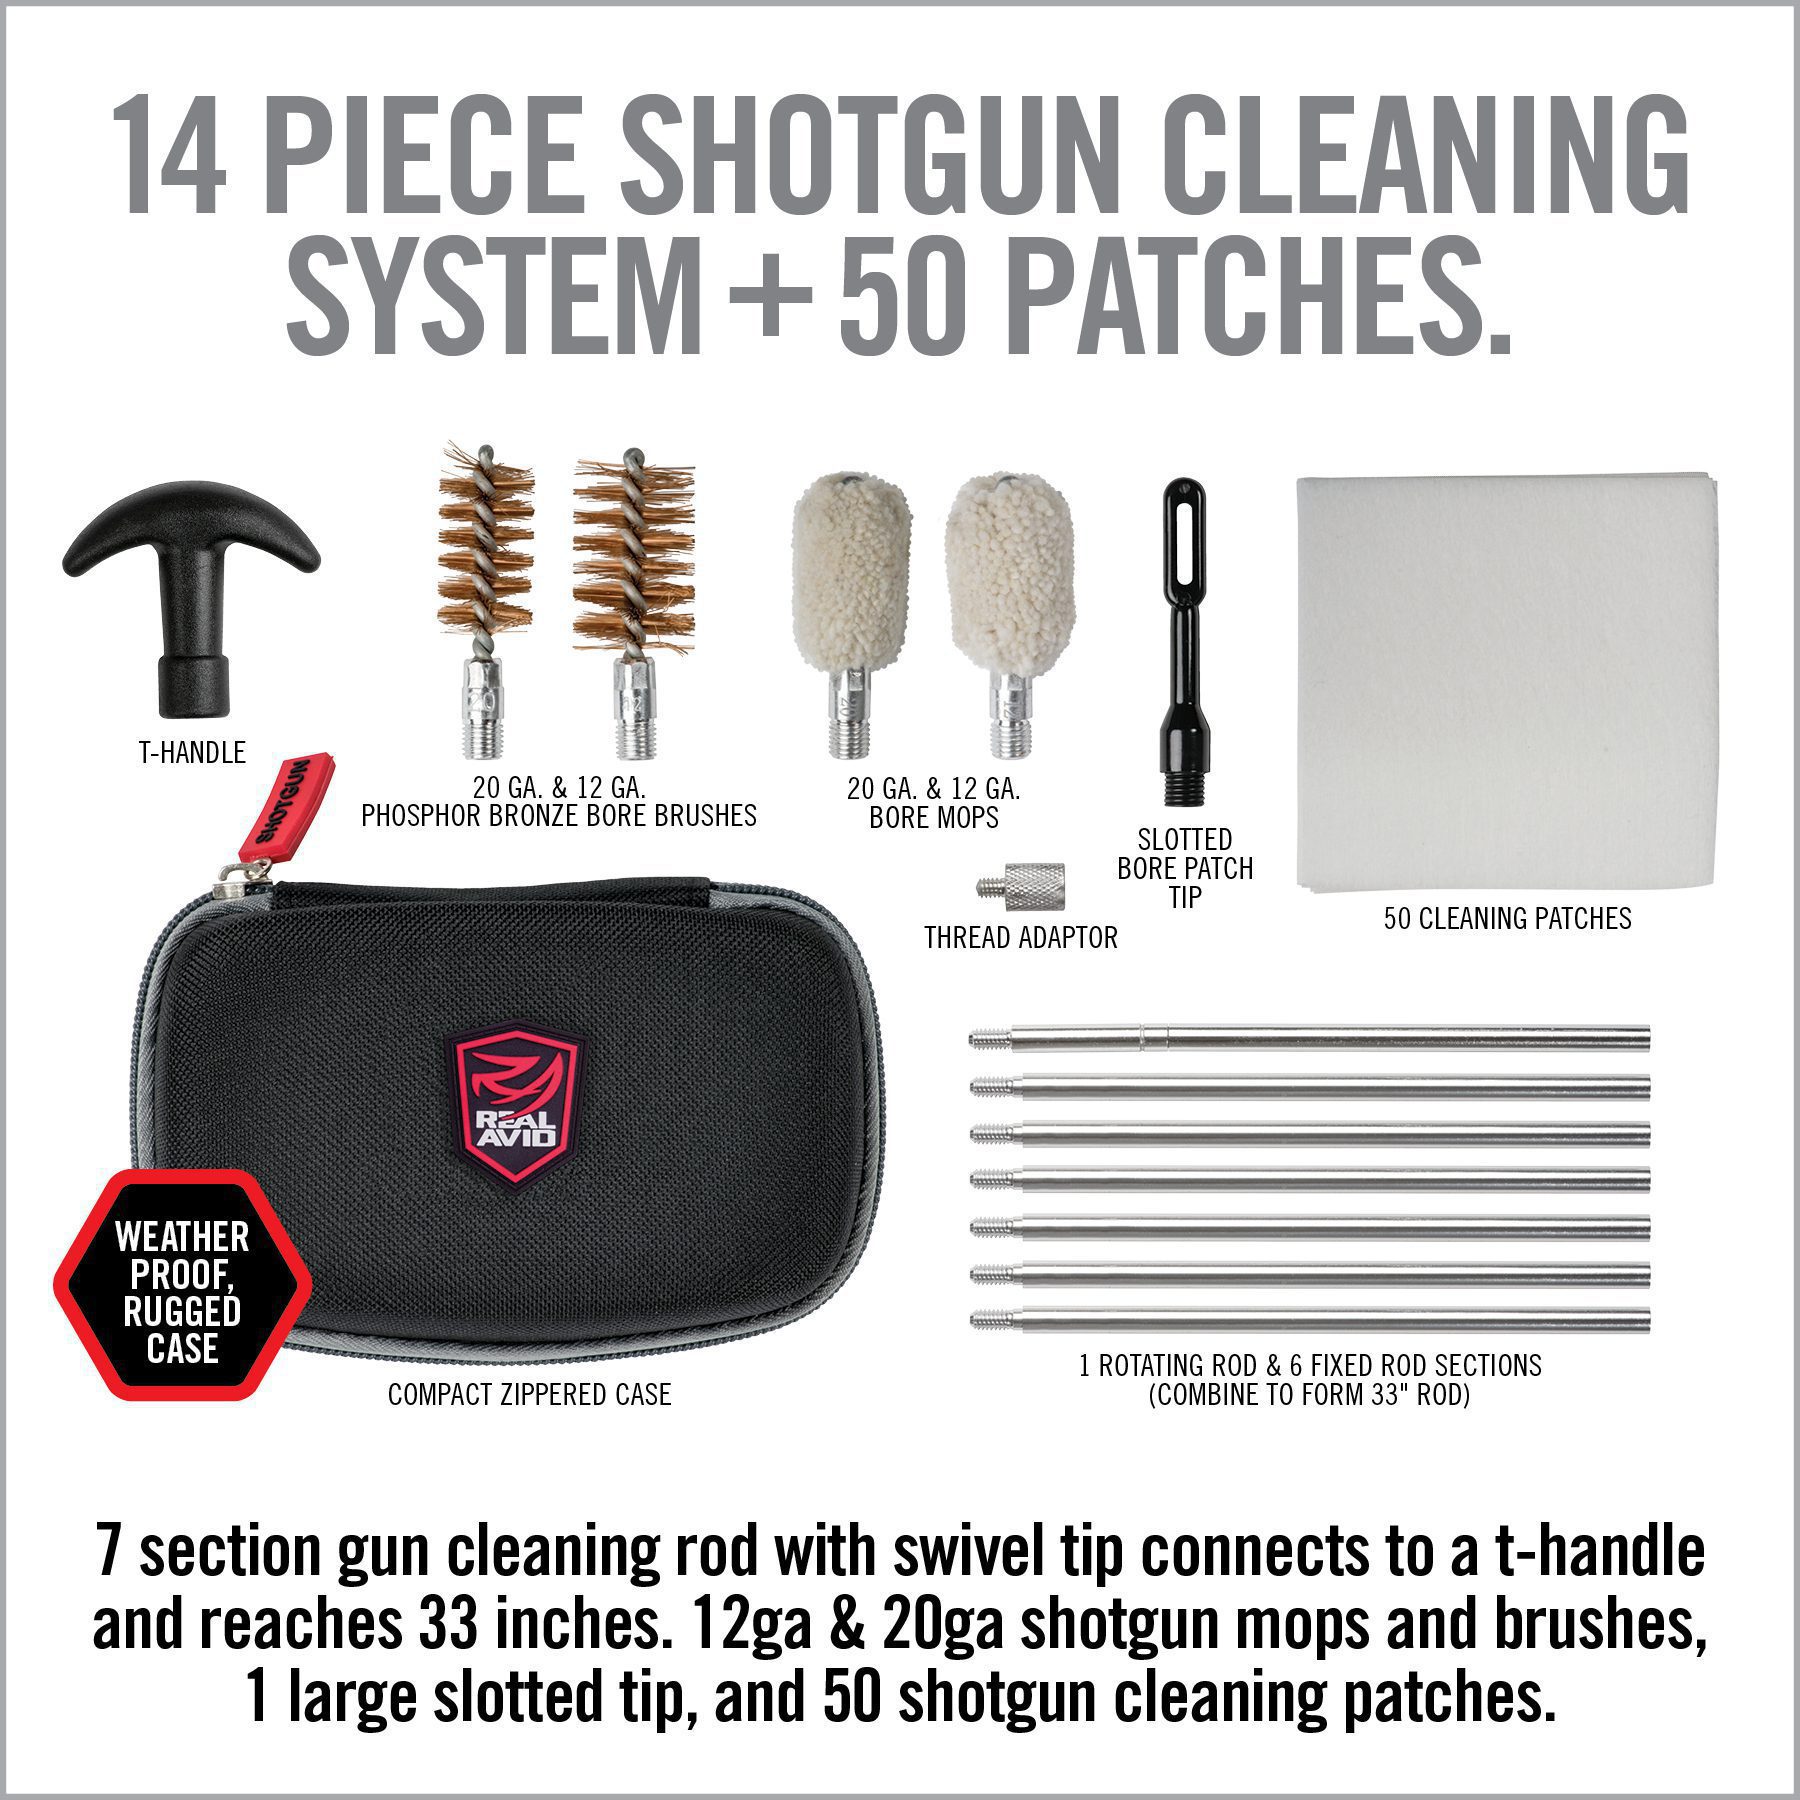 the complete cleaning kit includes brushes and other items